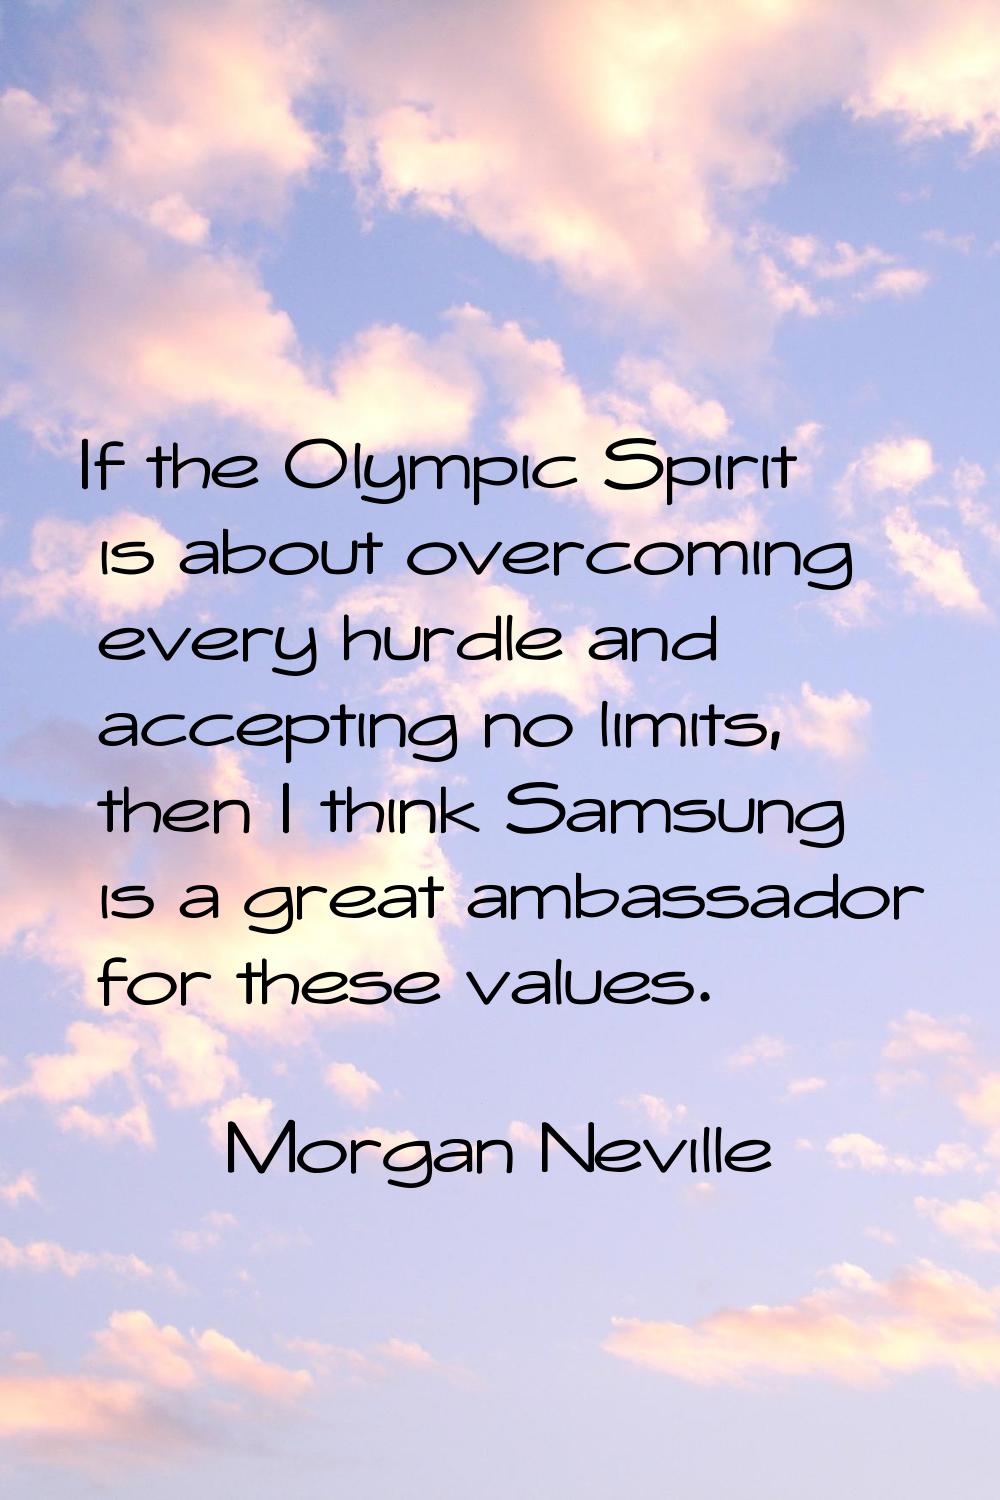 If the Olympic Spirit is about overcoming every hurdle and accepting no limits, then I think Samsun